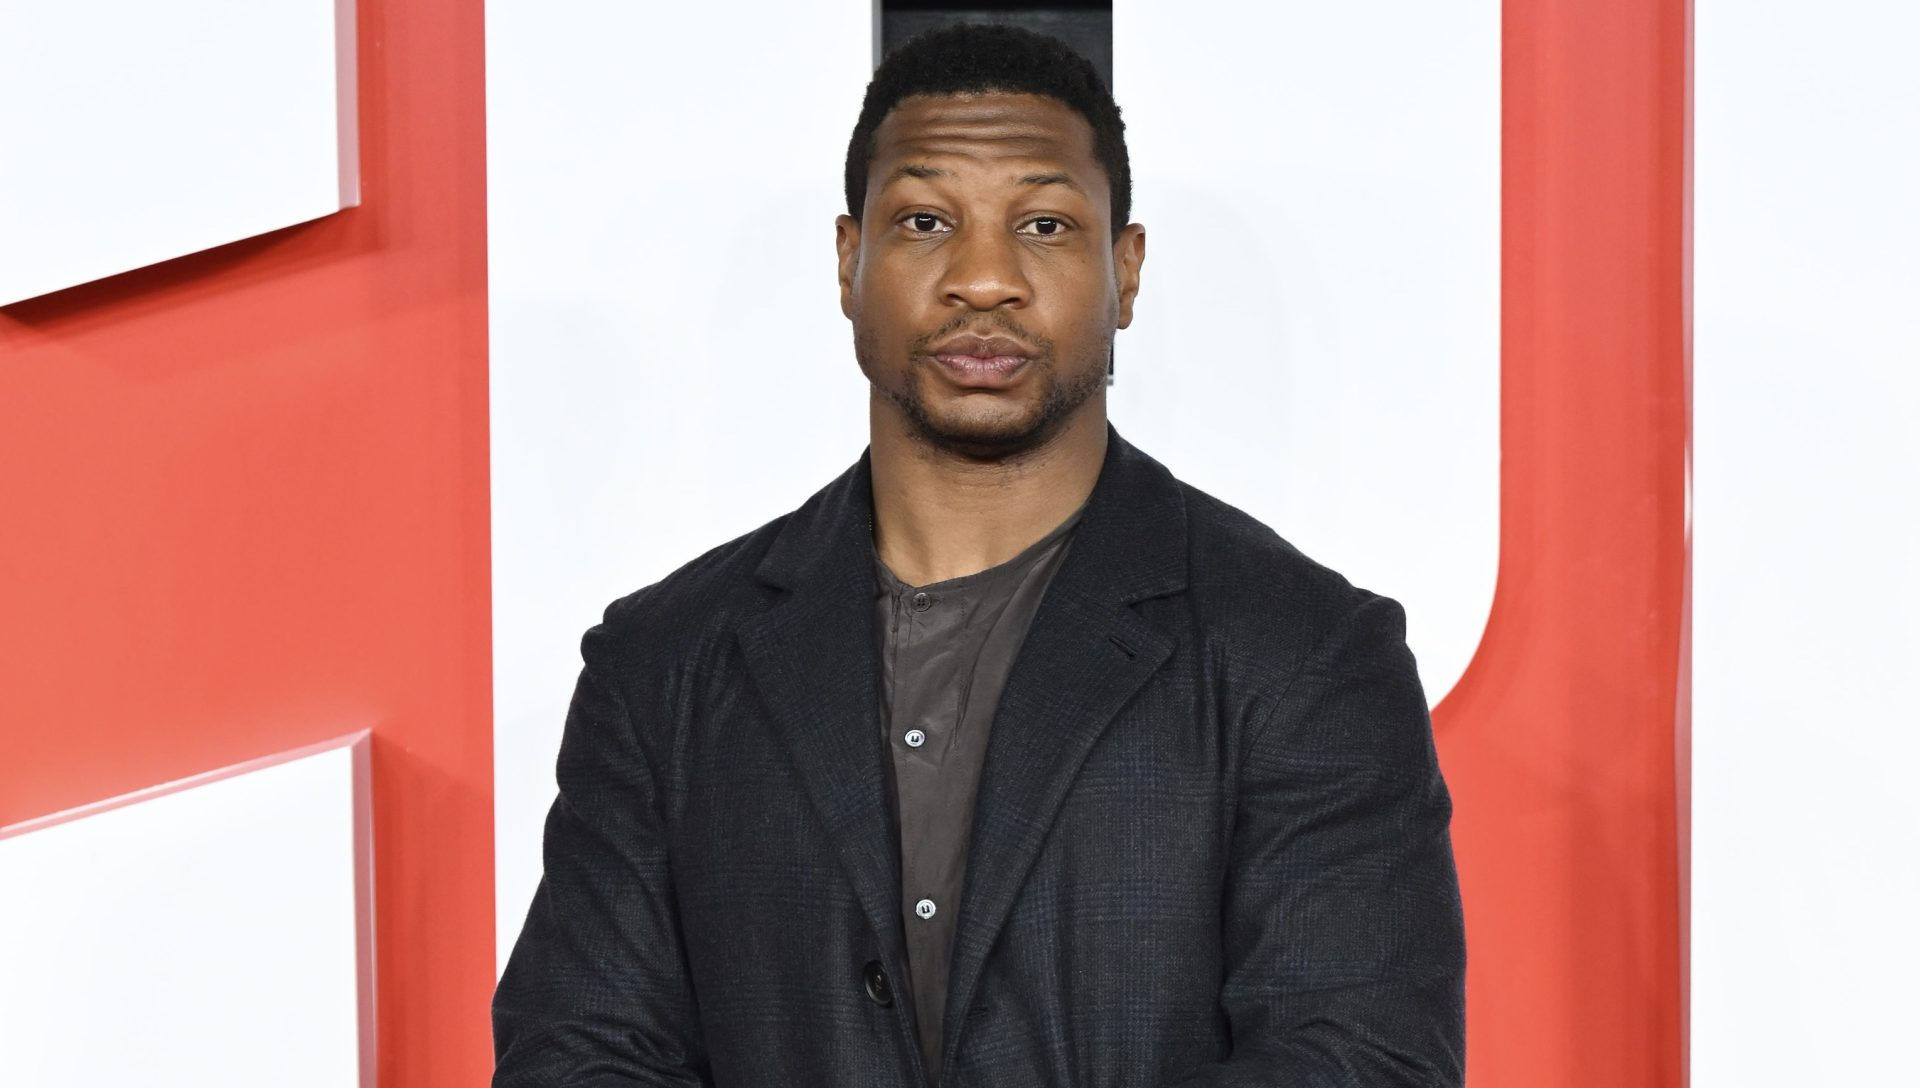 Viewers React To Footage Of Jonathan Majors Breaking Up Fight Between Teenagers Ahead Of Actor's Court Date